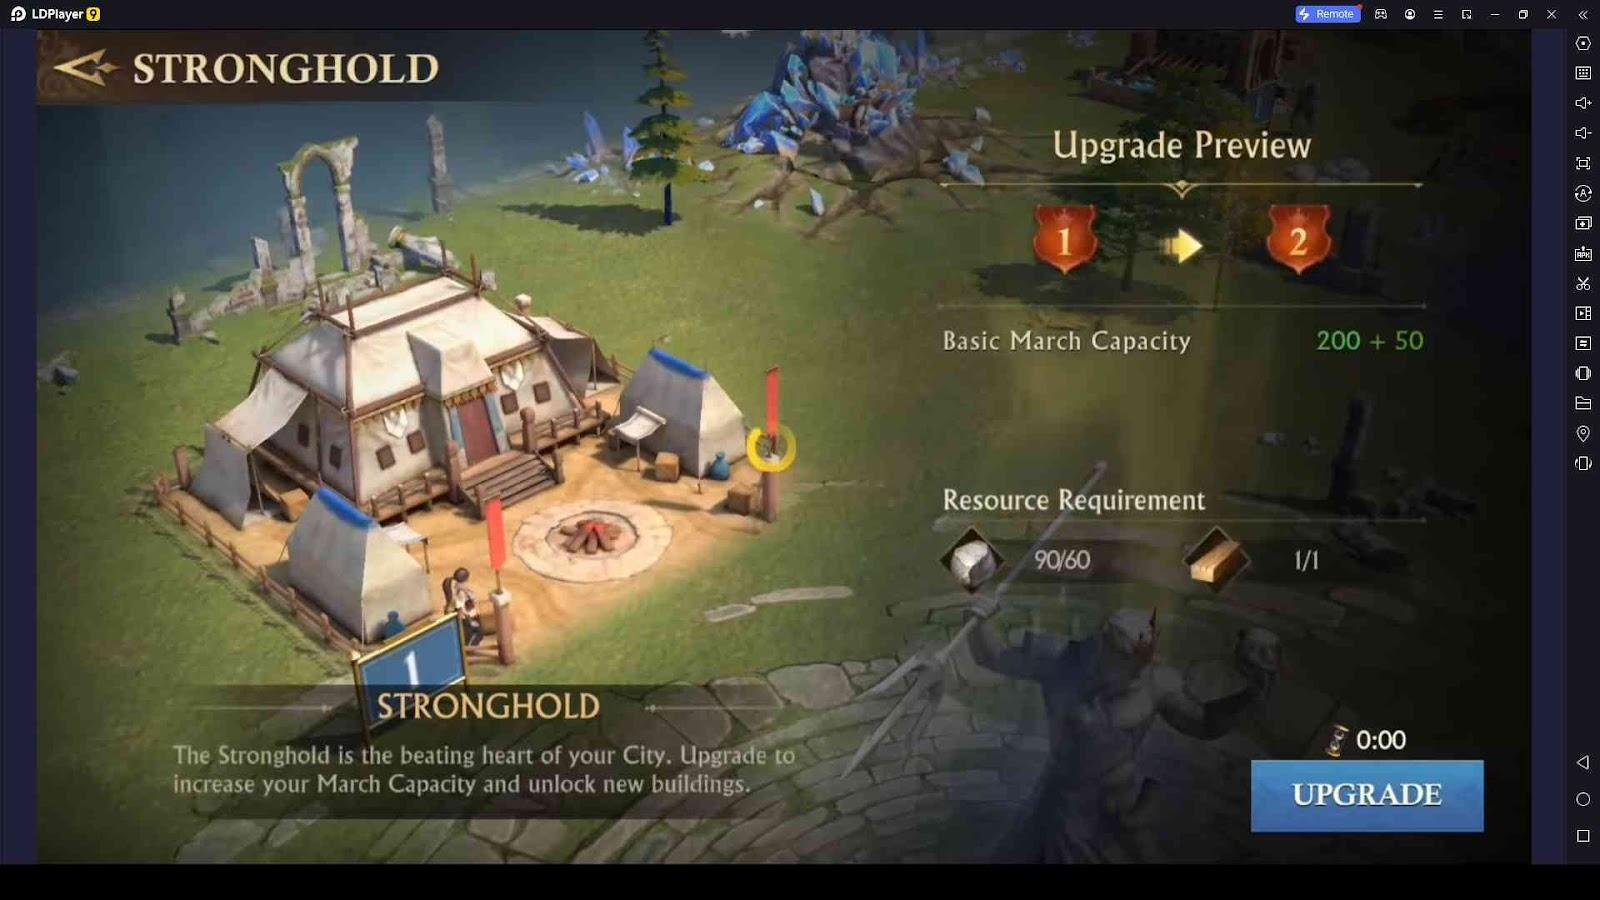 Upgrade the Stronghold in Treasure Hunter